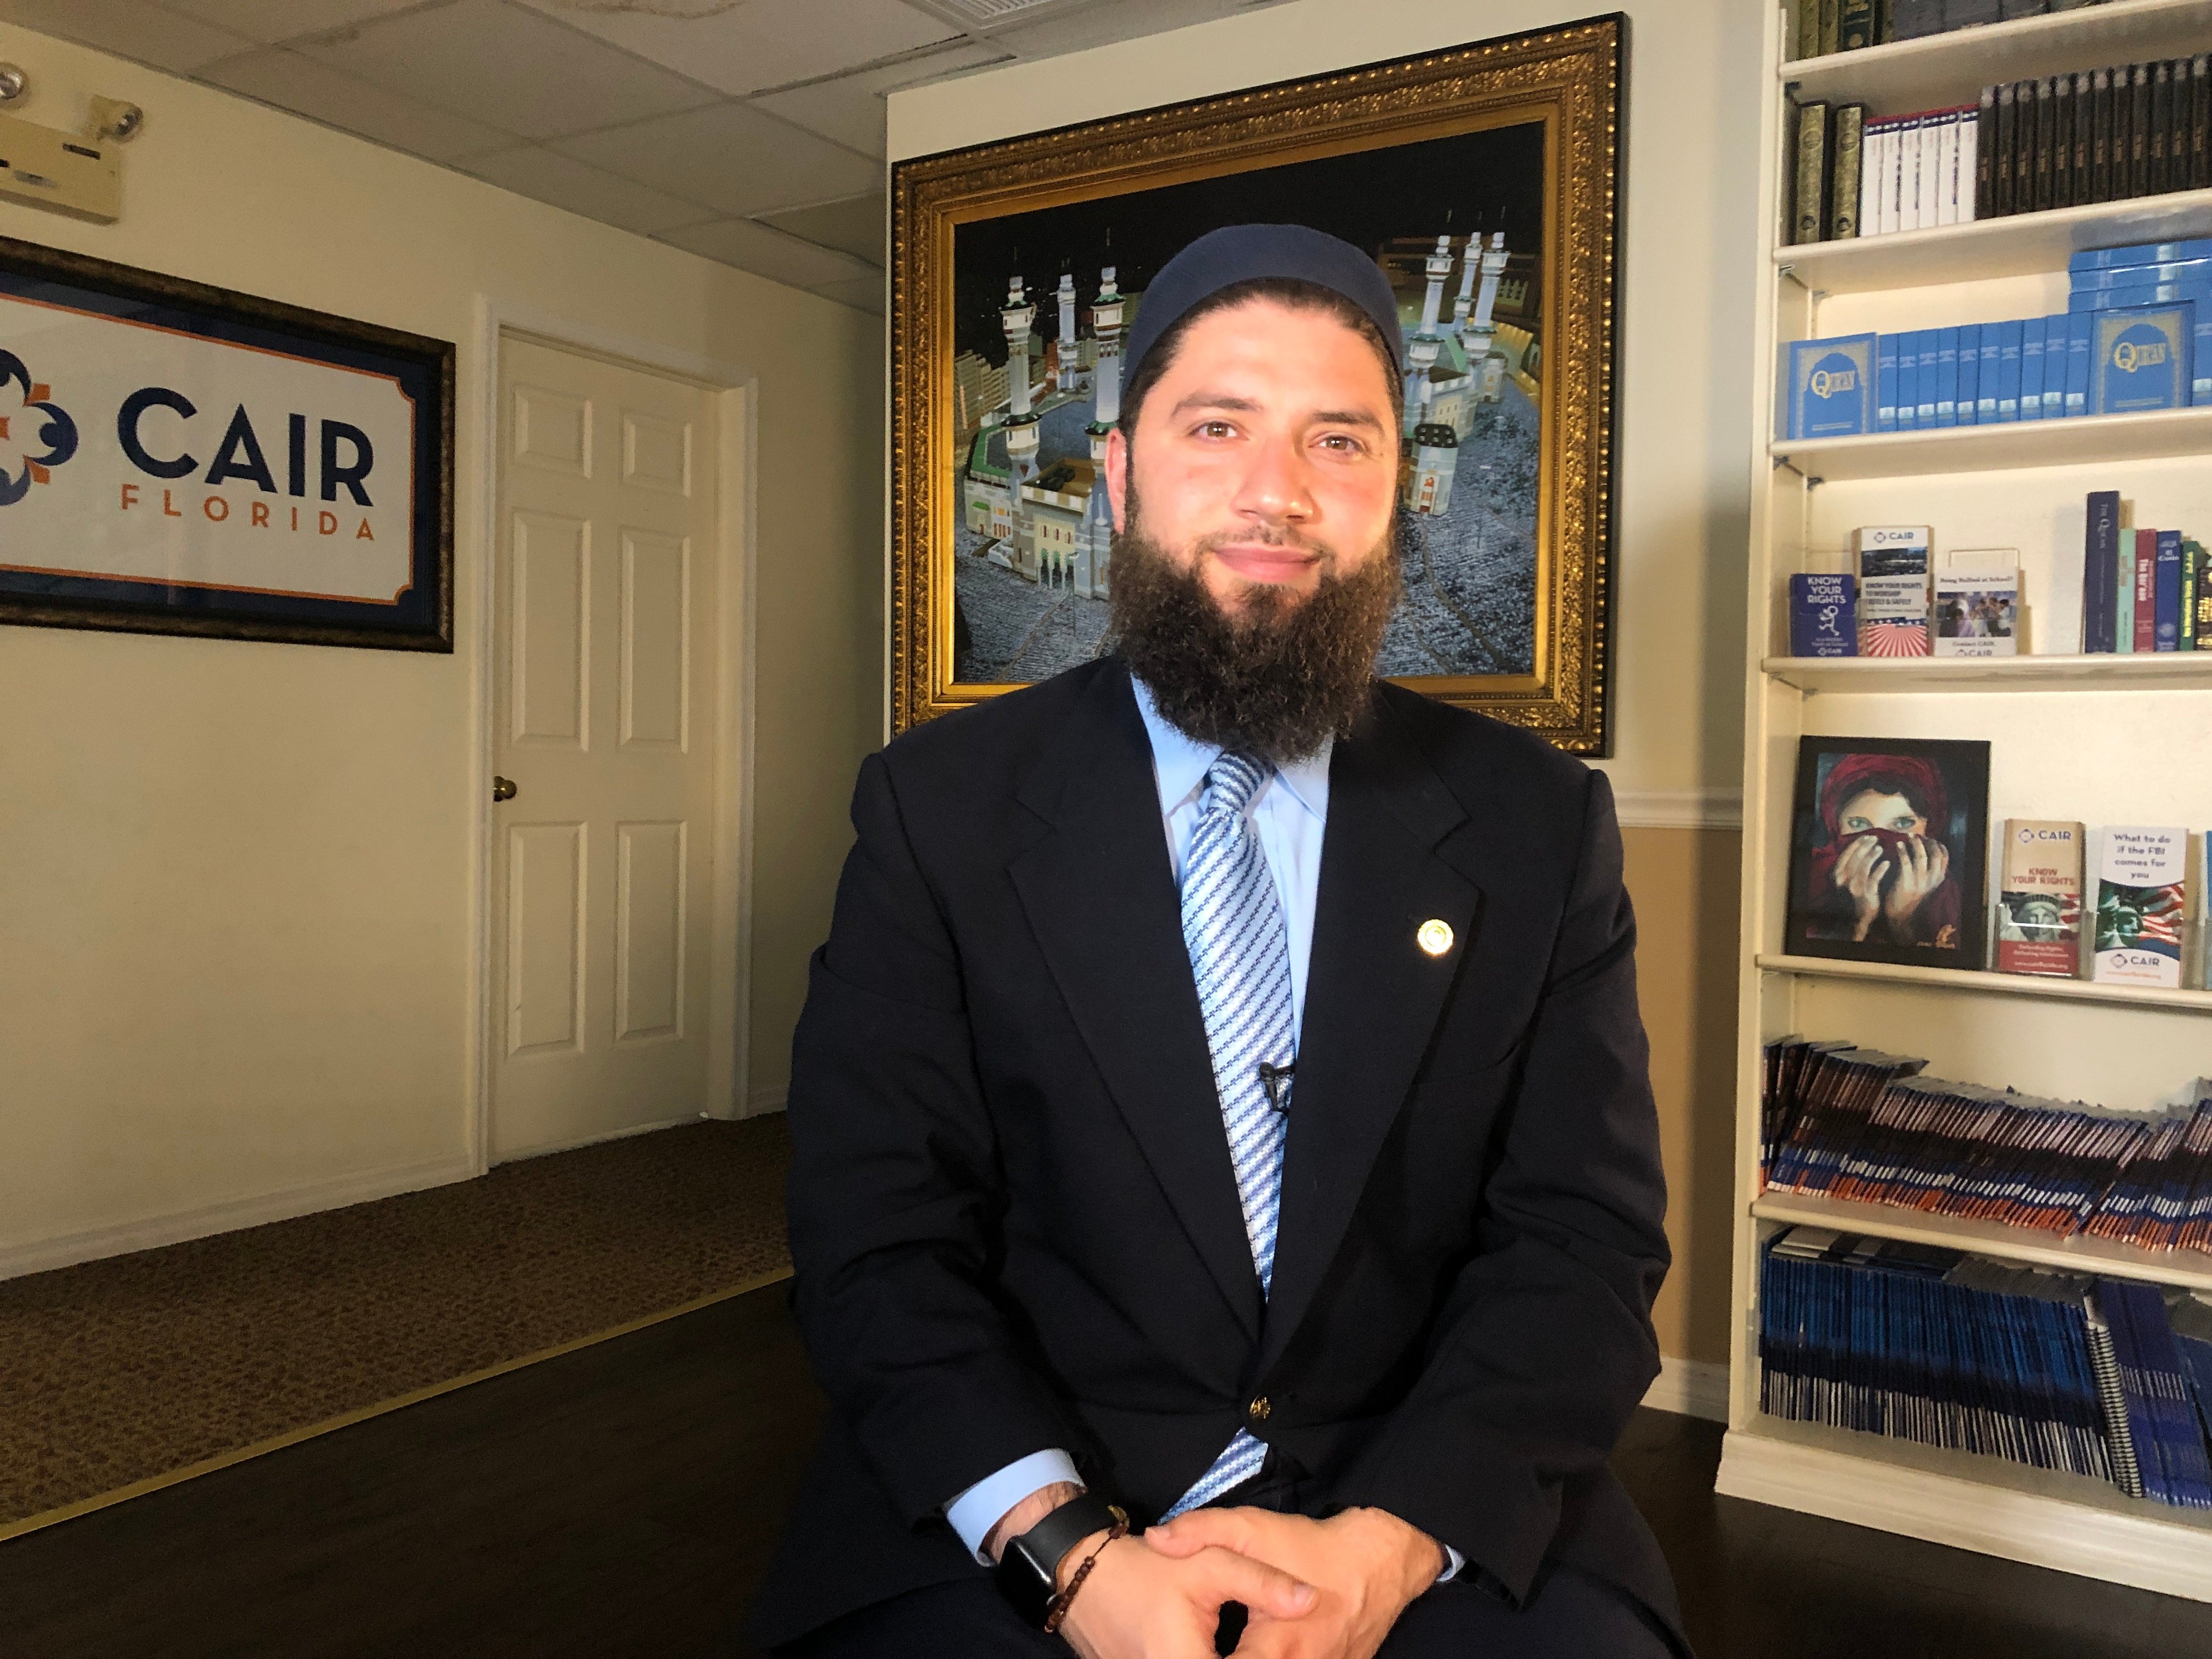 Hassan Shibly, lawyer for 24-year-old Hoda Muthana, poses in his office in Tampa, Florida, on February 20, 2019. (GIANRIGO MARLETTA/AFP/Getty Images)